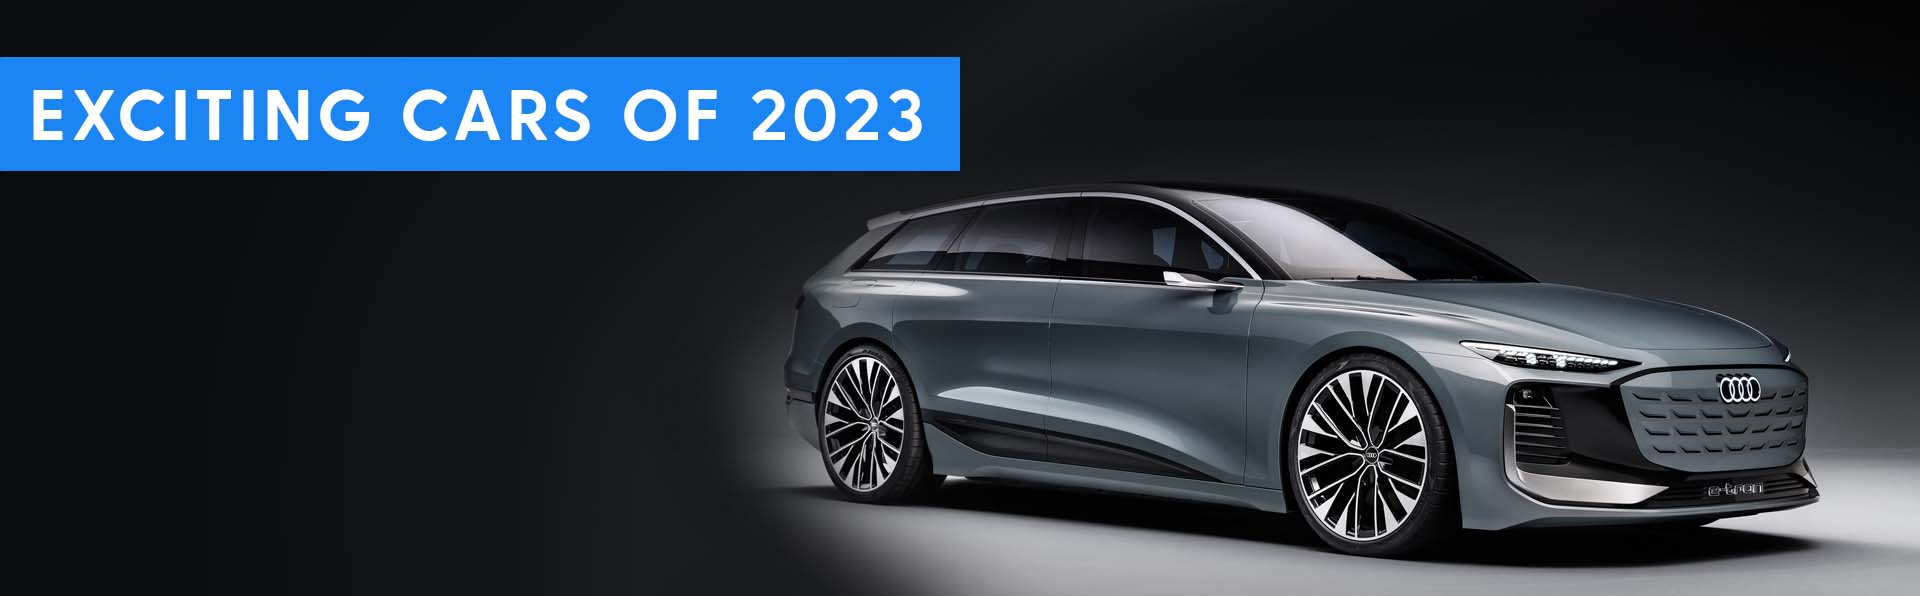 Exciting New Cars for 2023